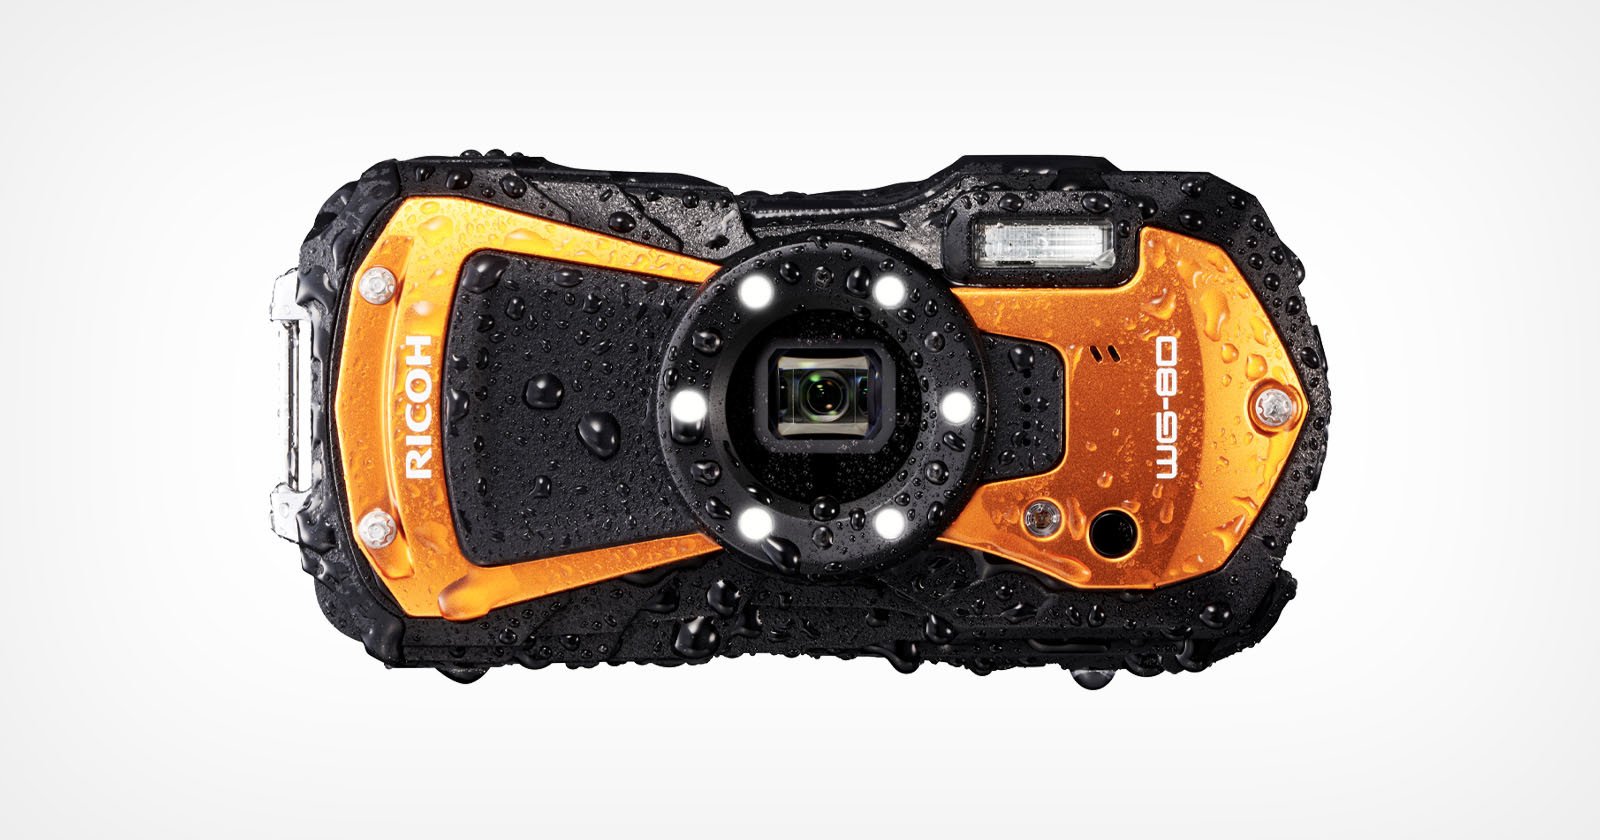  ricoh wg-80 ultra-rugged point-and-shoot built-in lights 